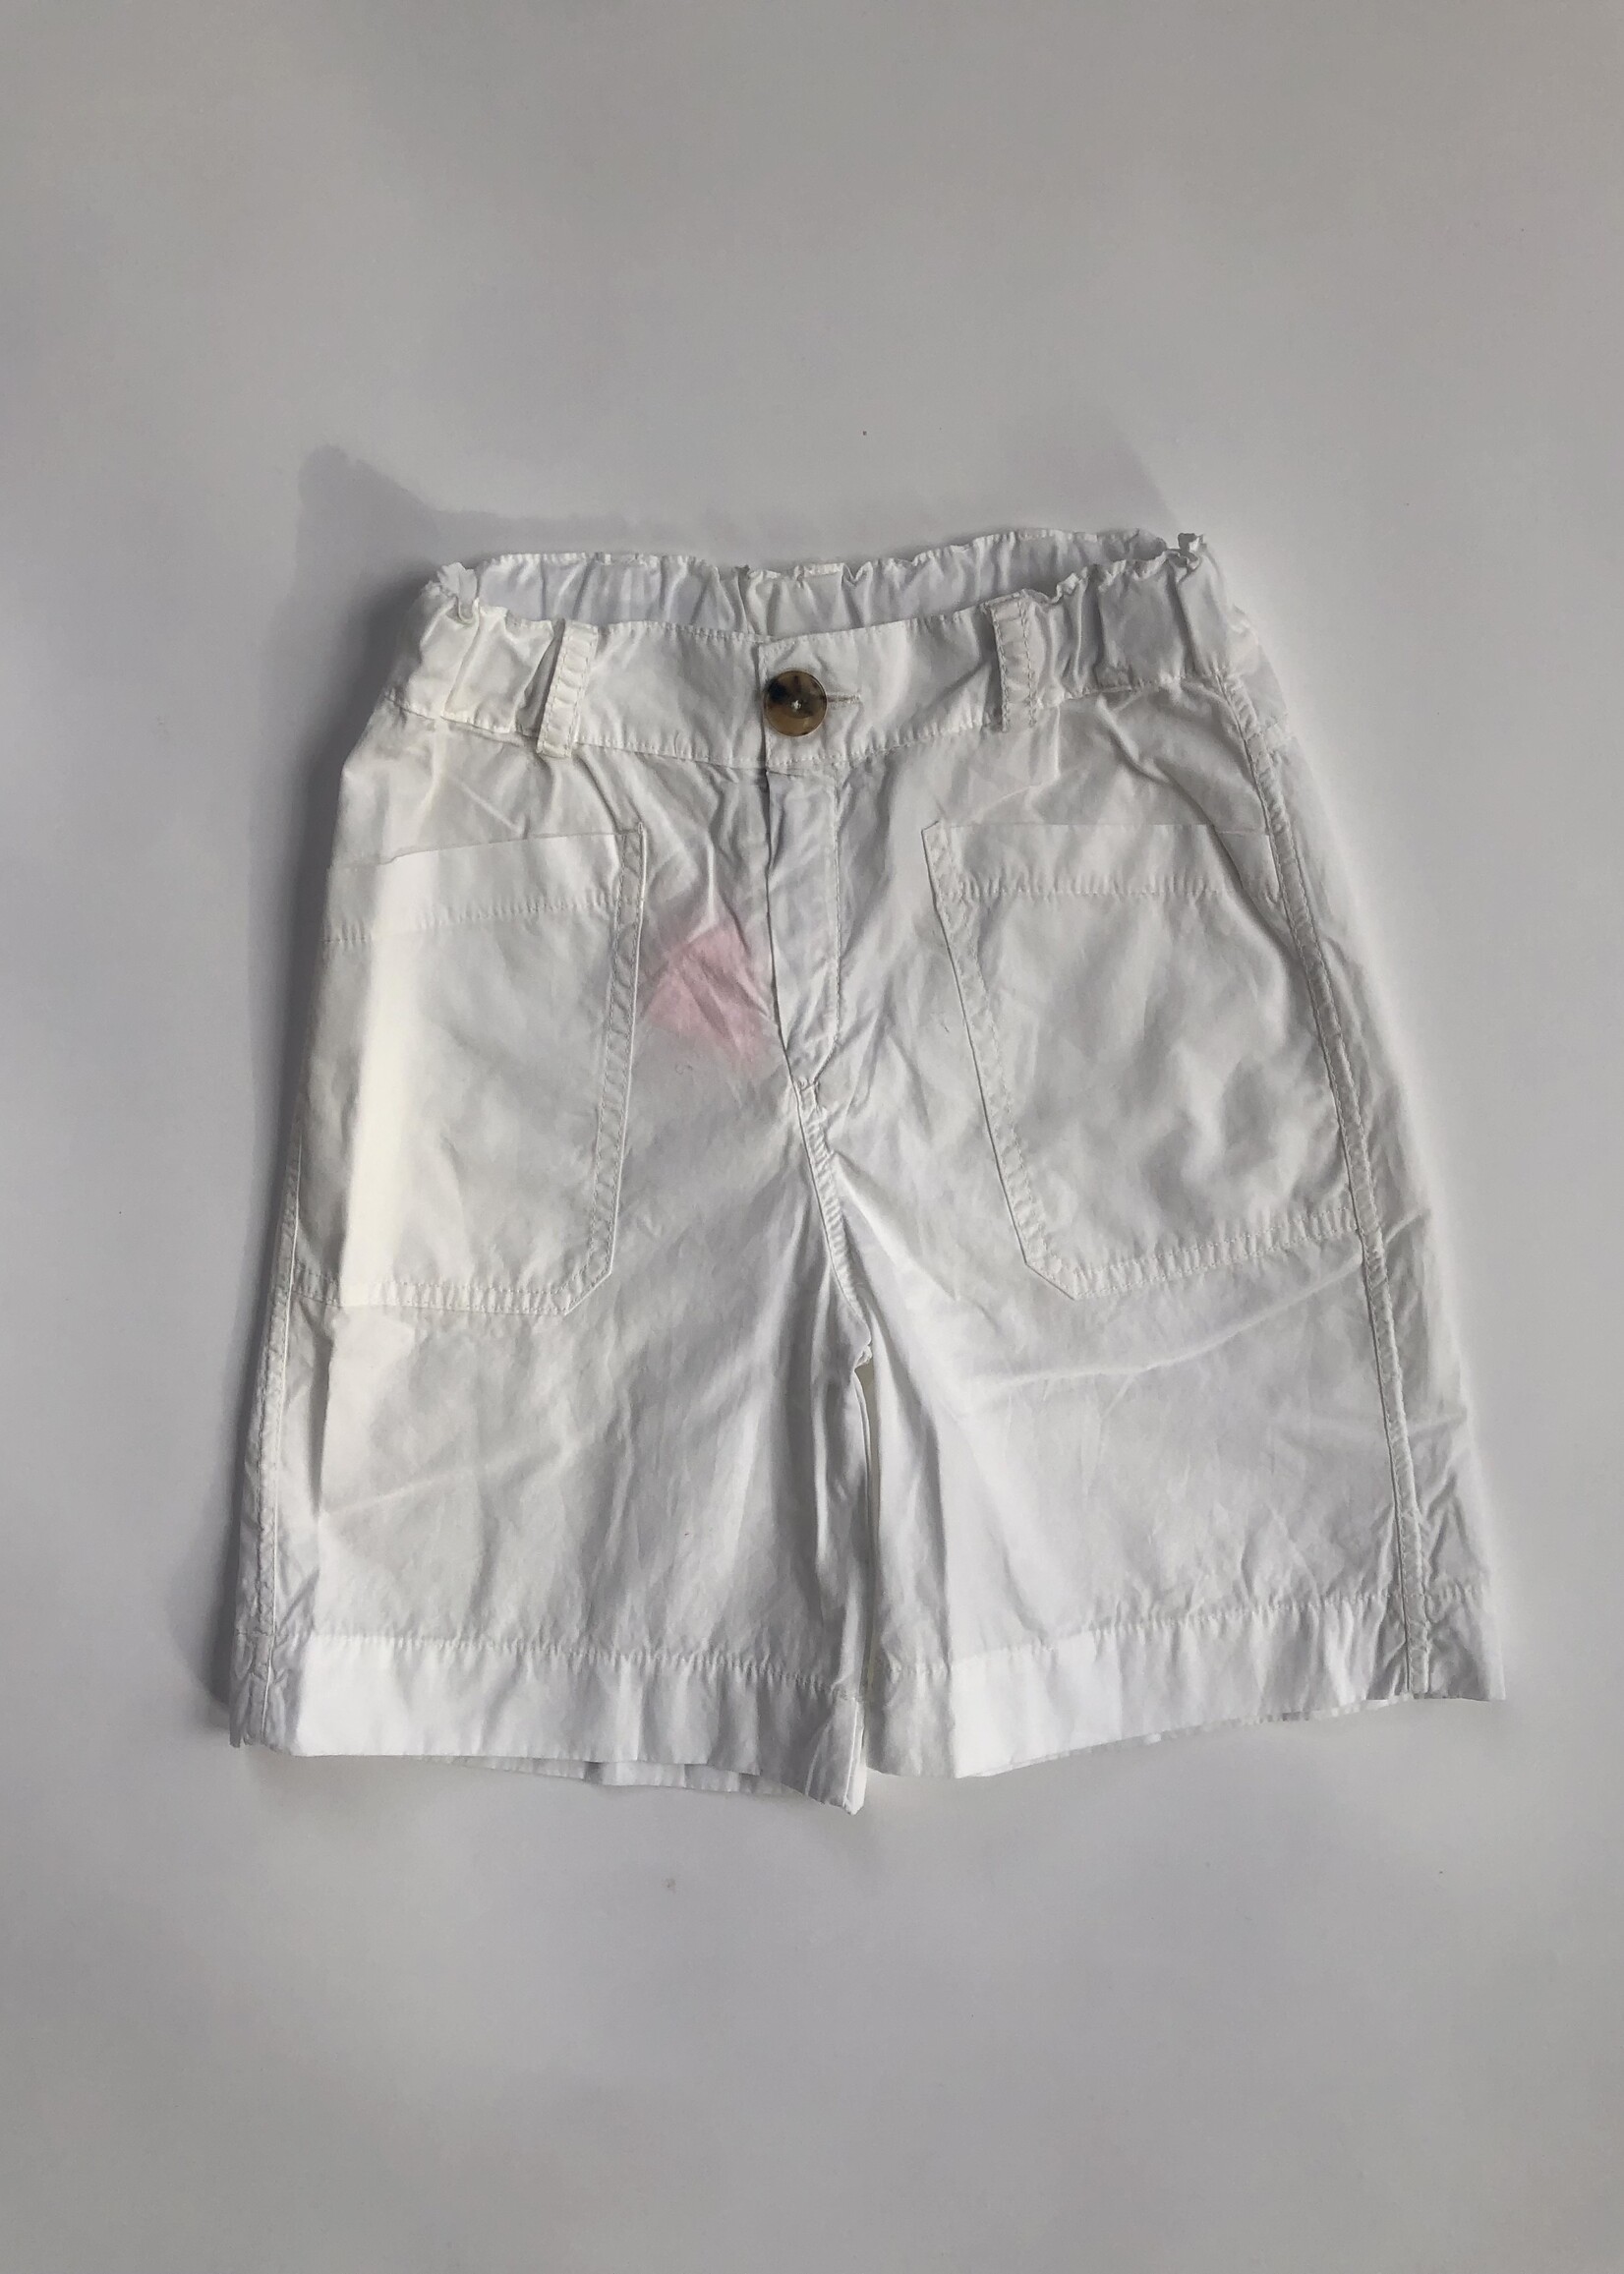 Long Live The Queen Bright White bermuda short 8y